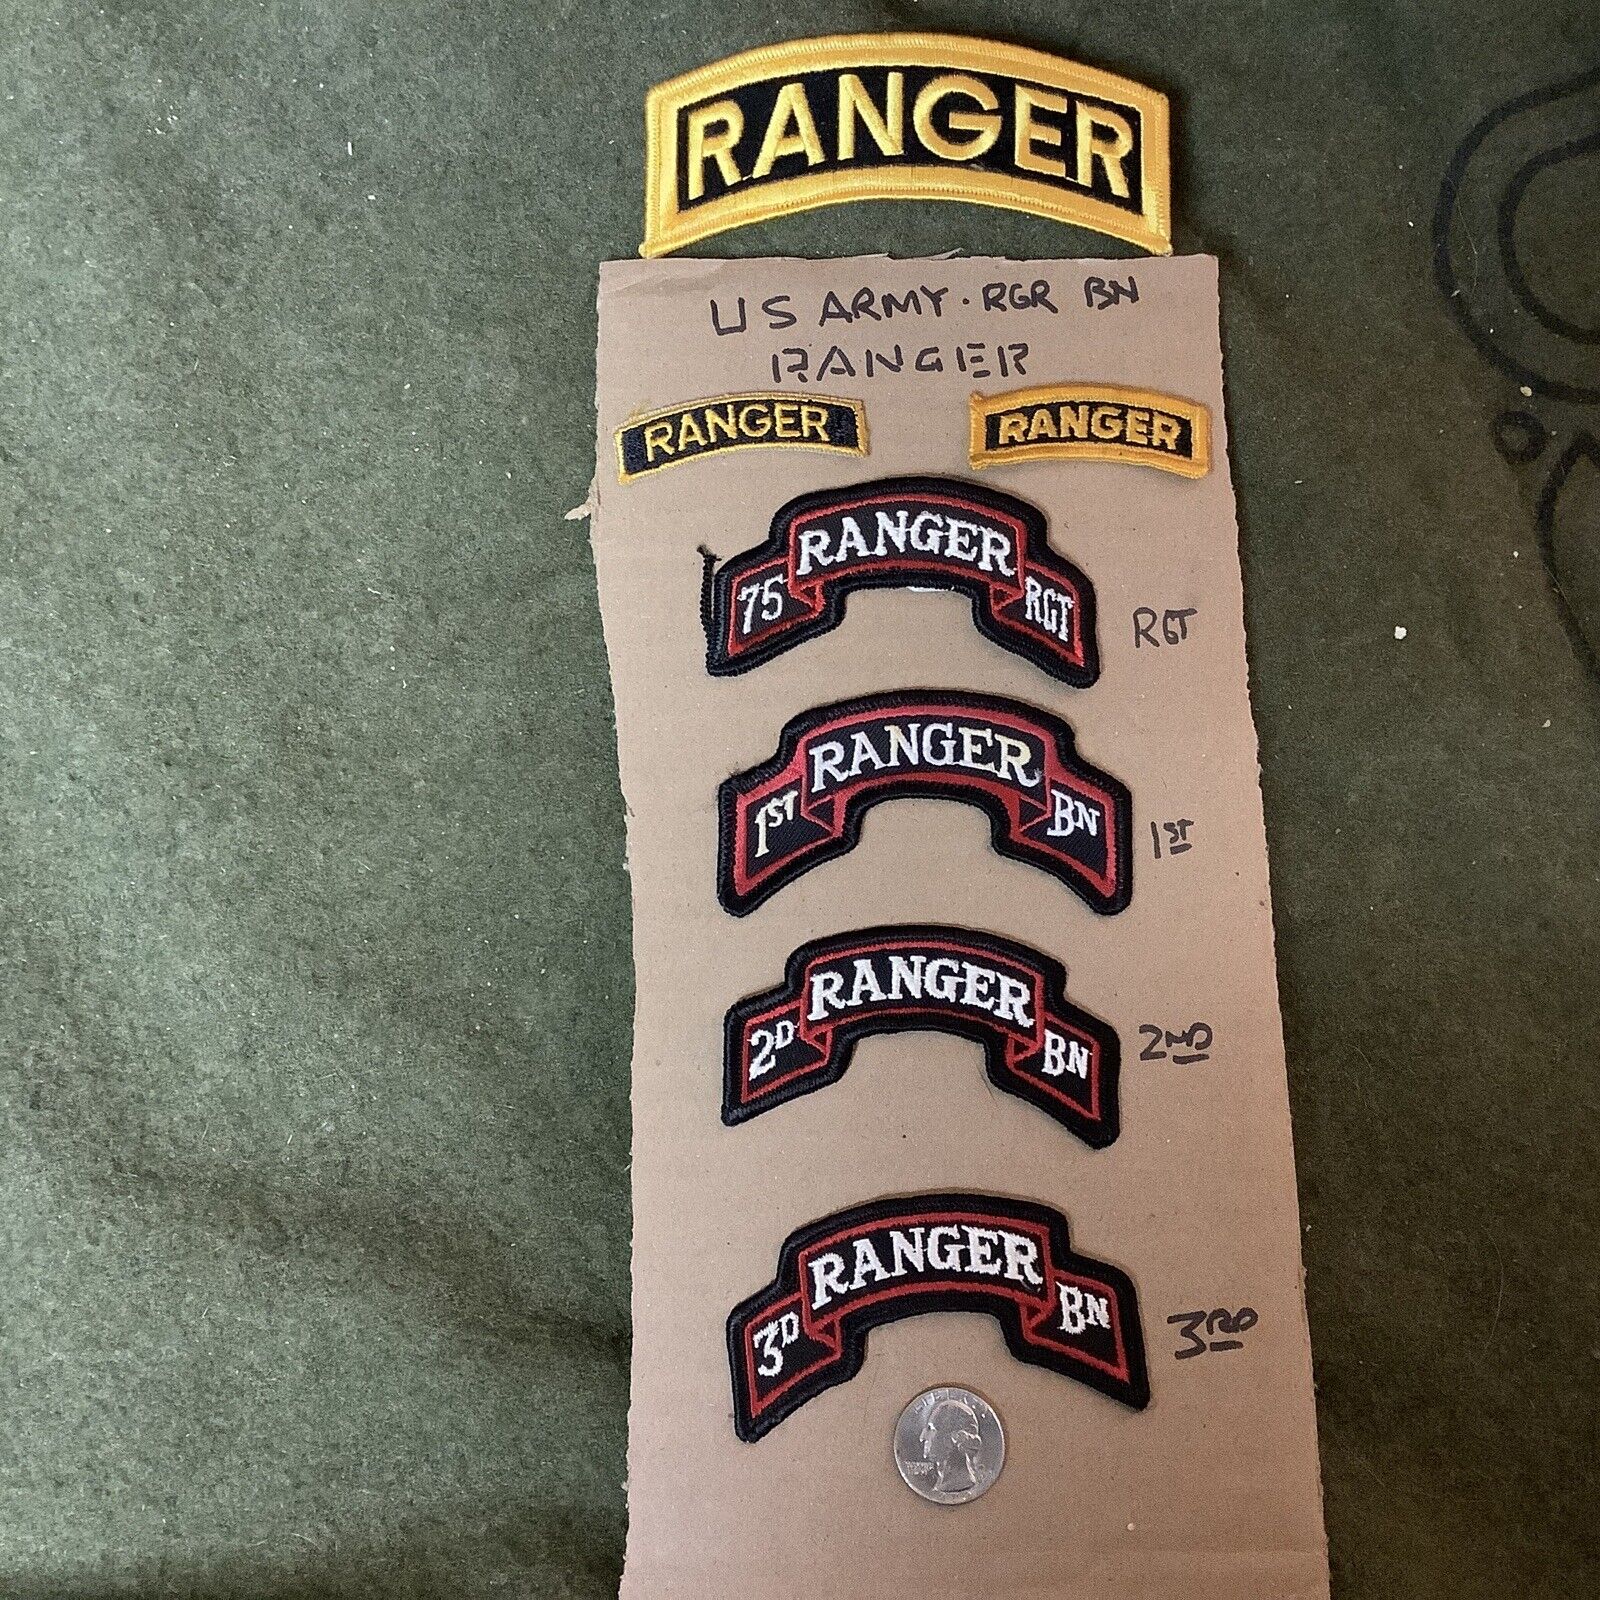 US Army RANGER Patch Set ( All New / Official US Army Issued) Rare